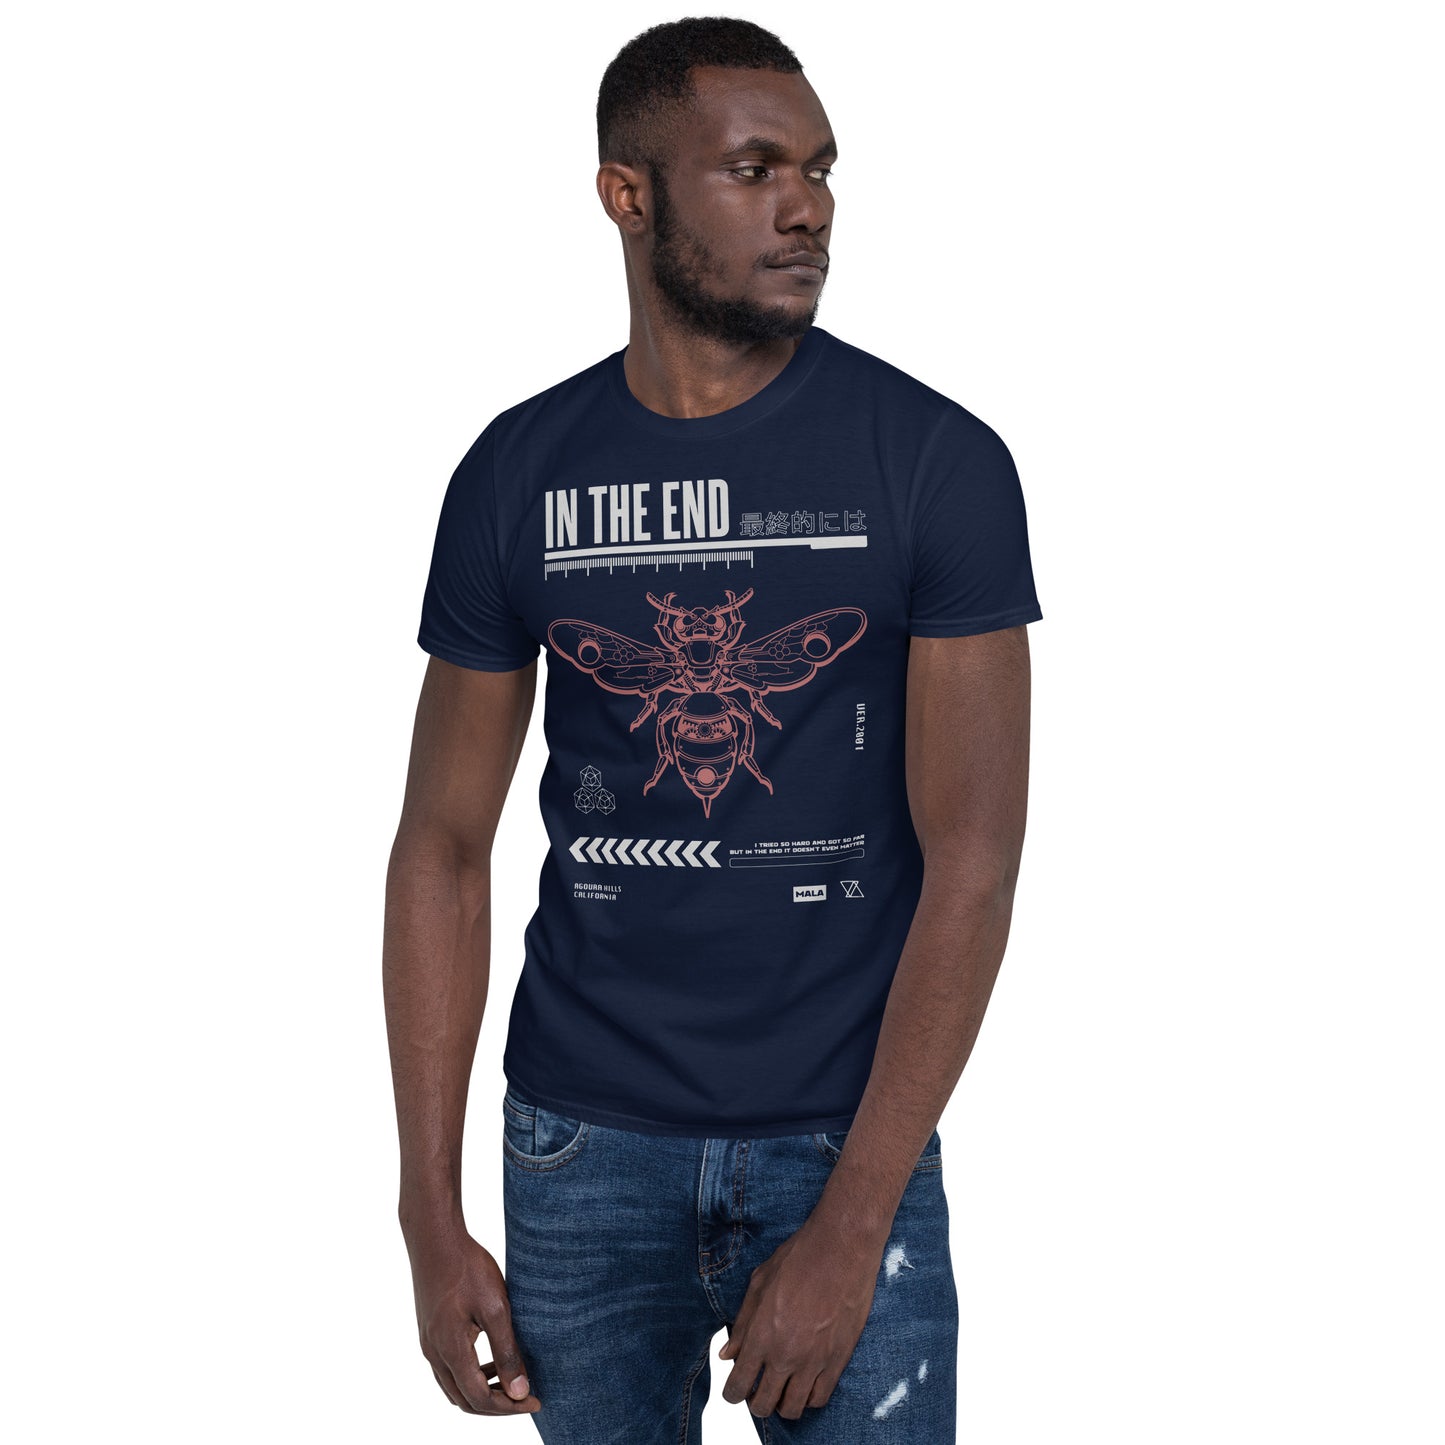 In The End - Men's T-Shirt